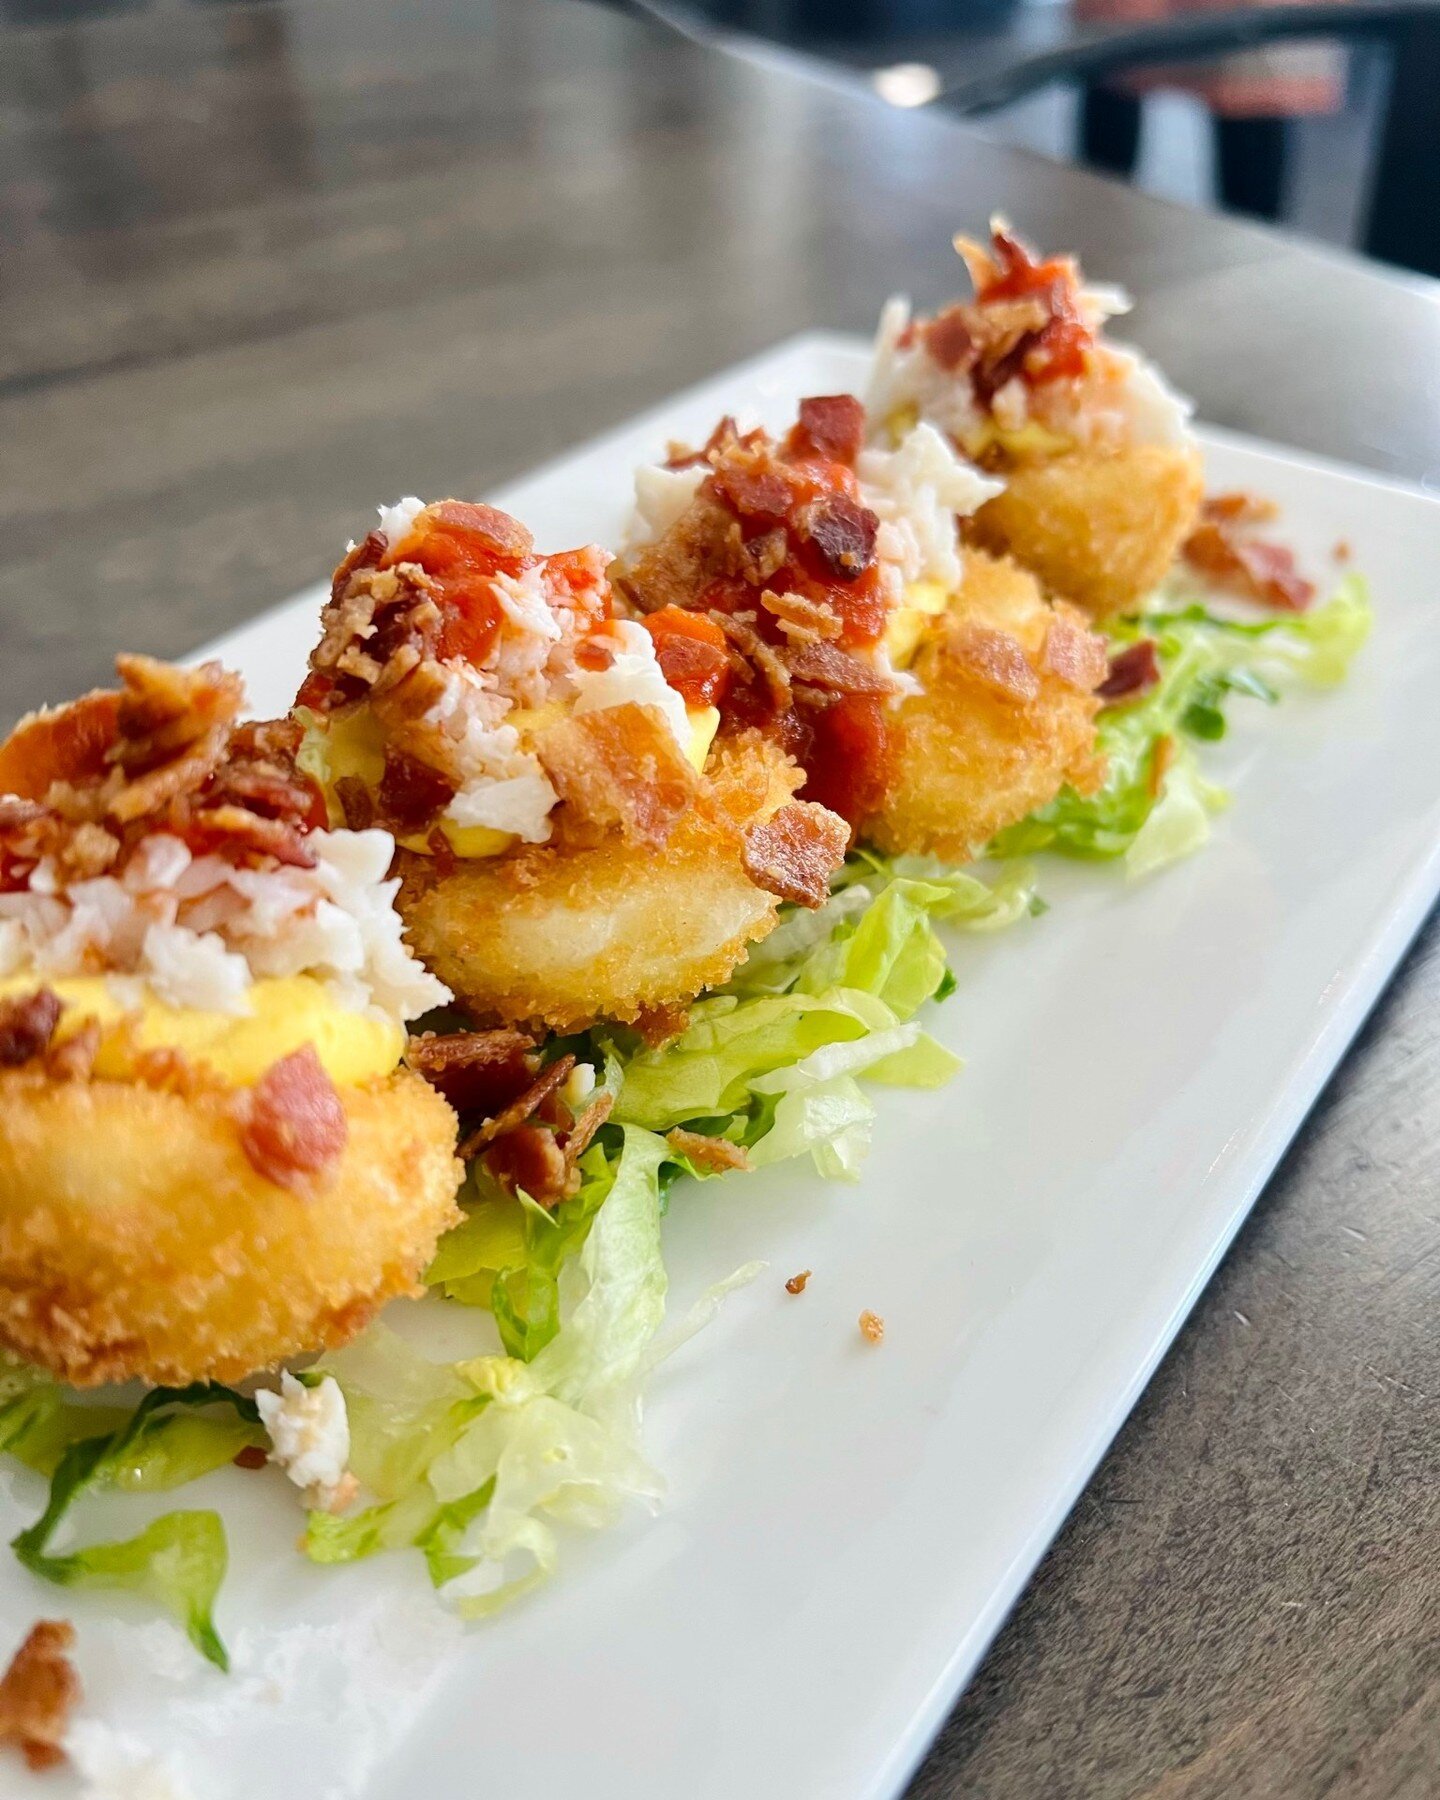 Happy Weekend! 🥳 Not only do we have bottomless brunch today, but we also have delicious dinner options! 😍 #GetToThePoint this weekend and satisfy those cravings!

#baltimore #fellspointdistrict #foodie #citylife